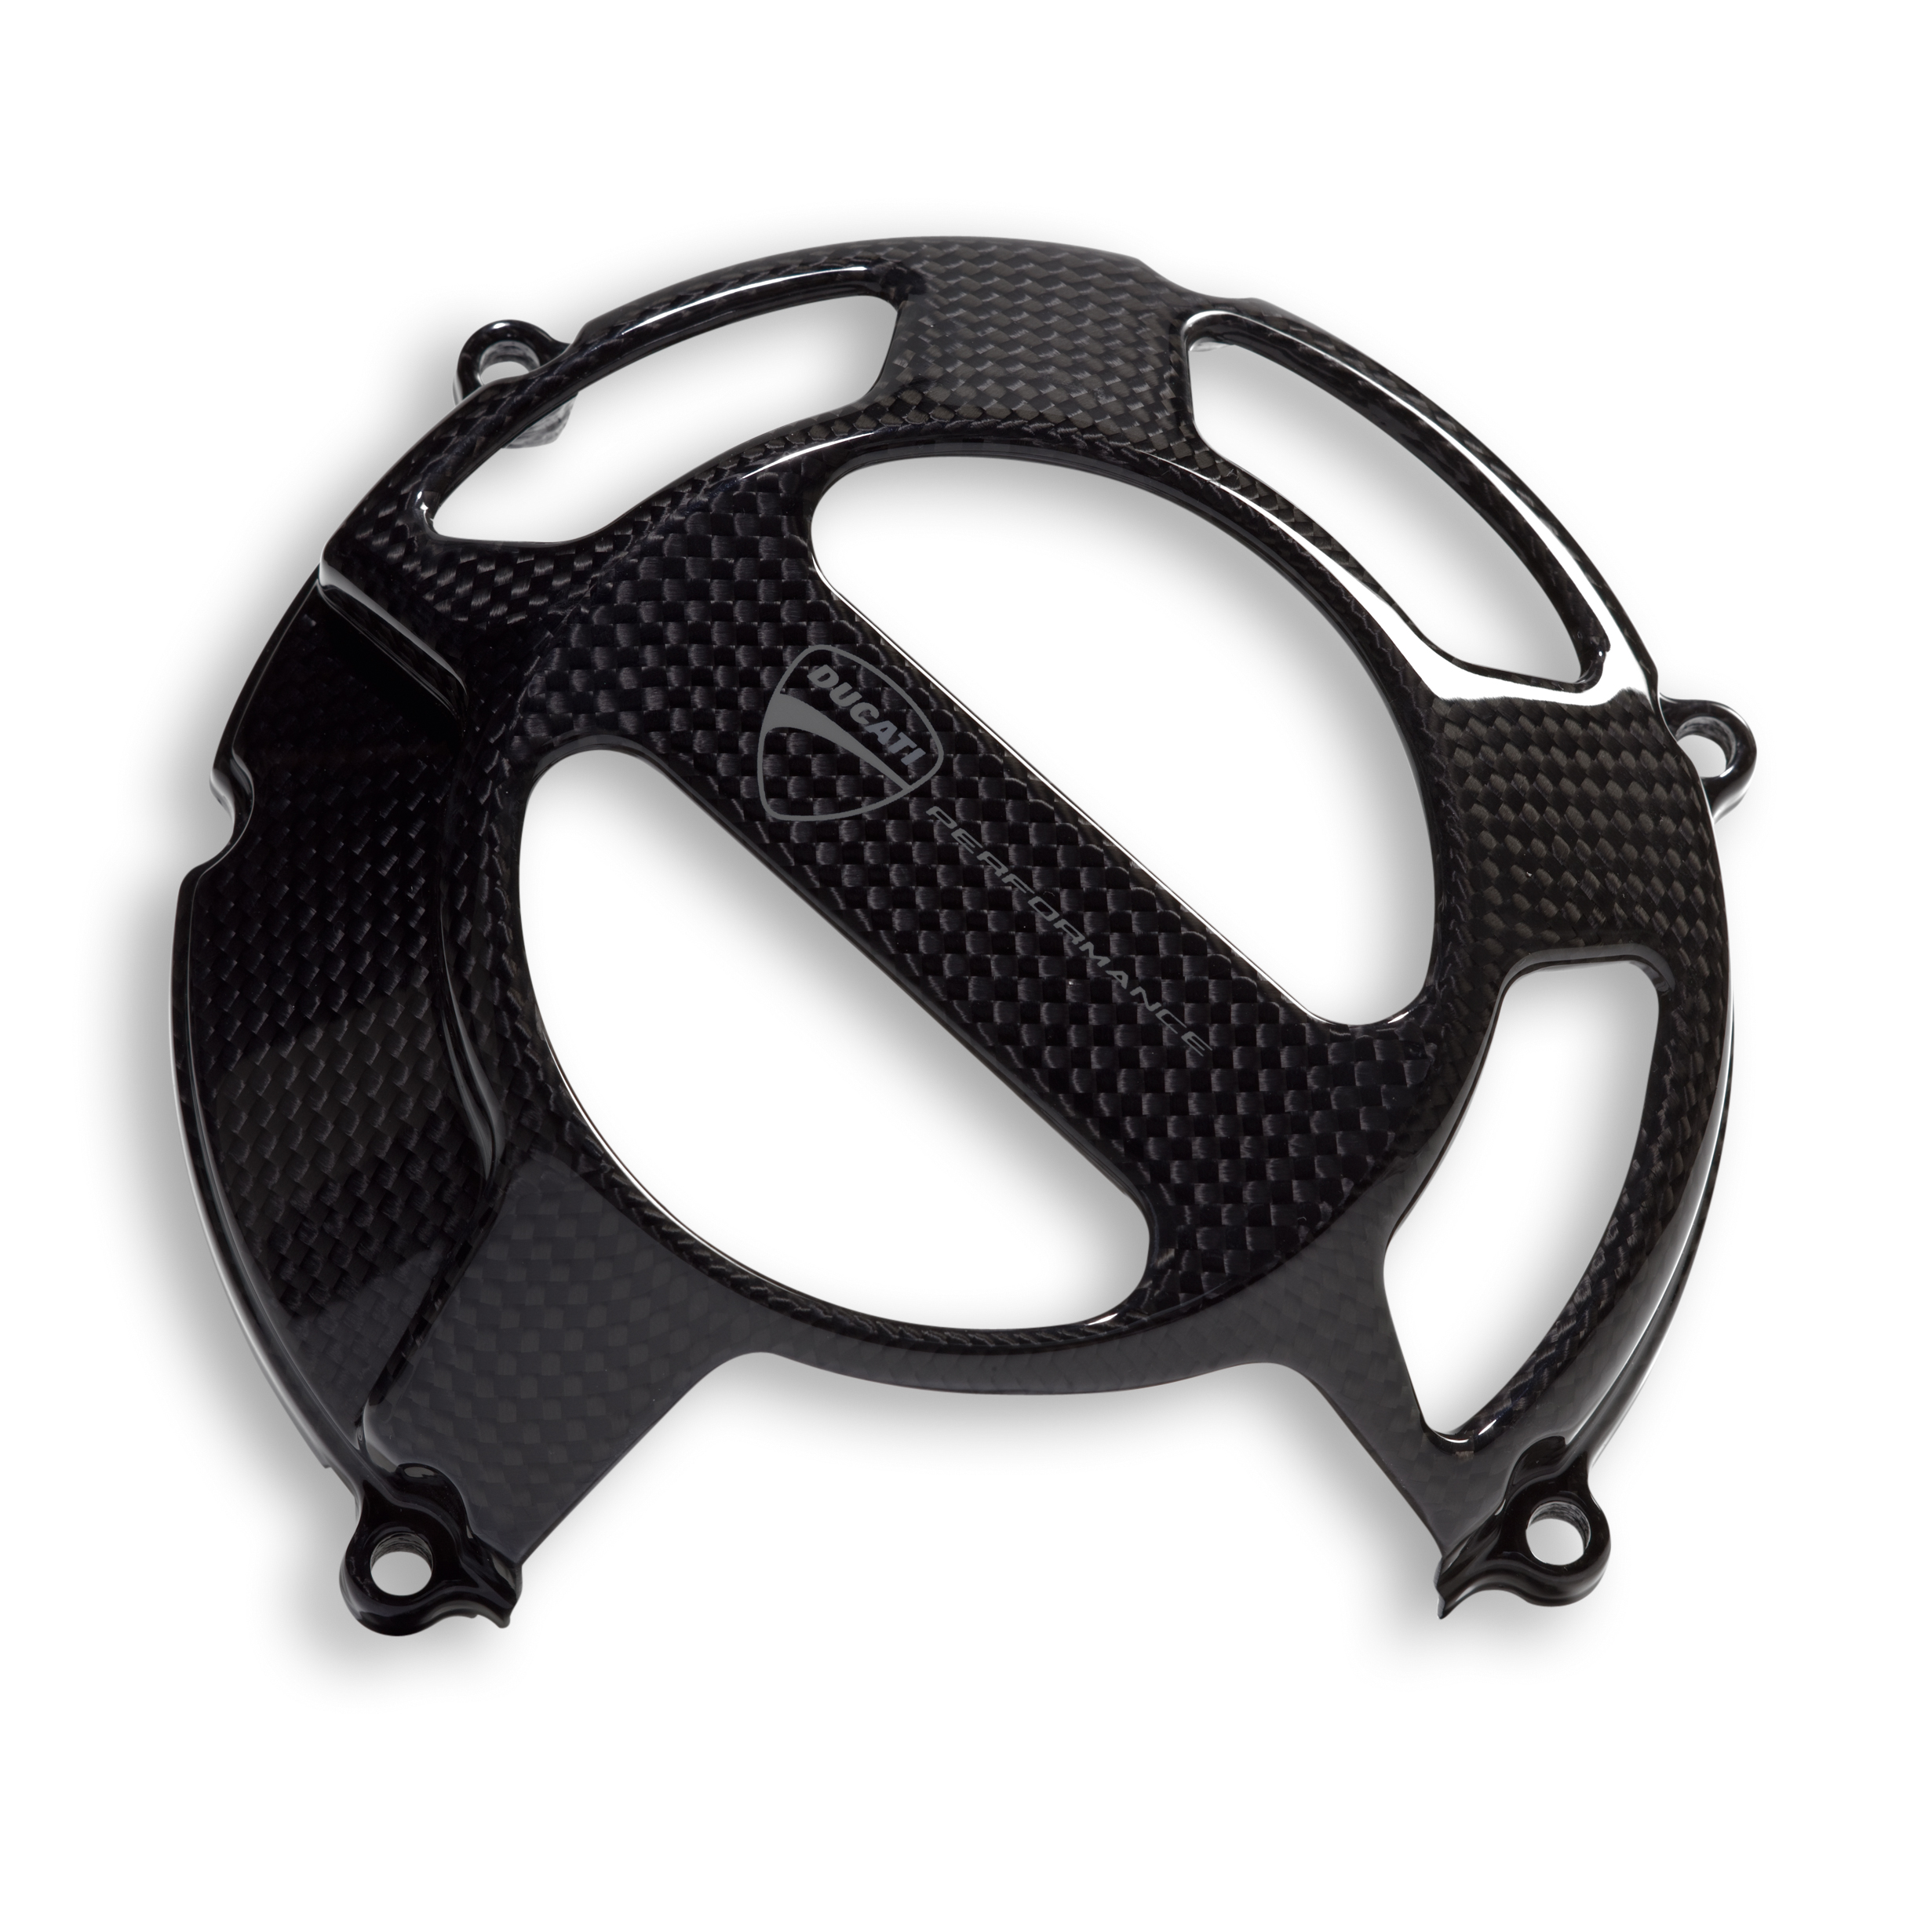 Streetfighter style open carbon clutch cover. 